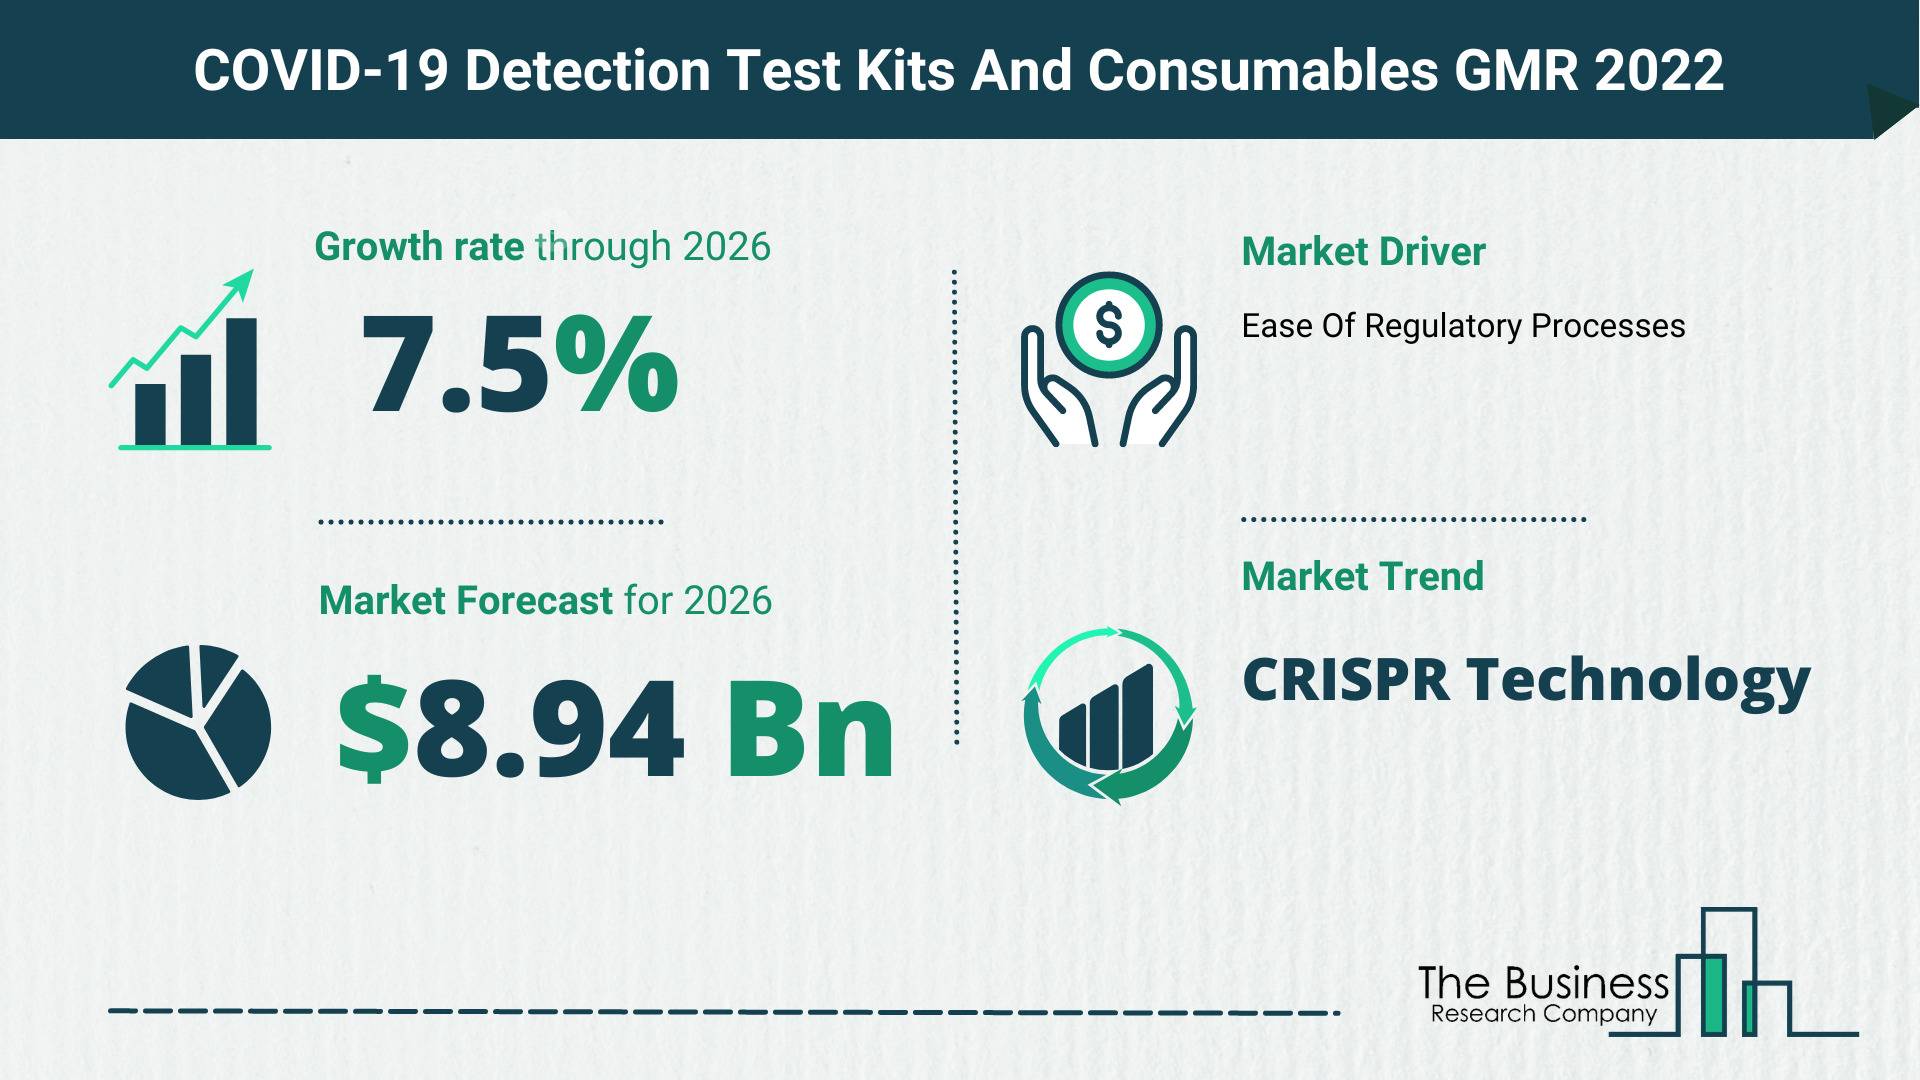 Global COVID-19 Detection Test Kits And Consumables Market